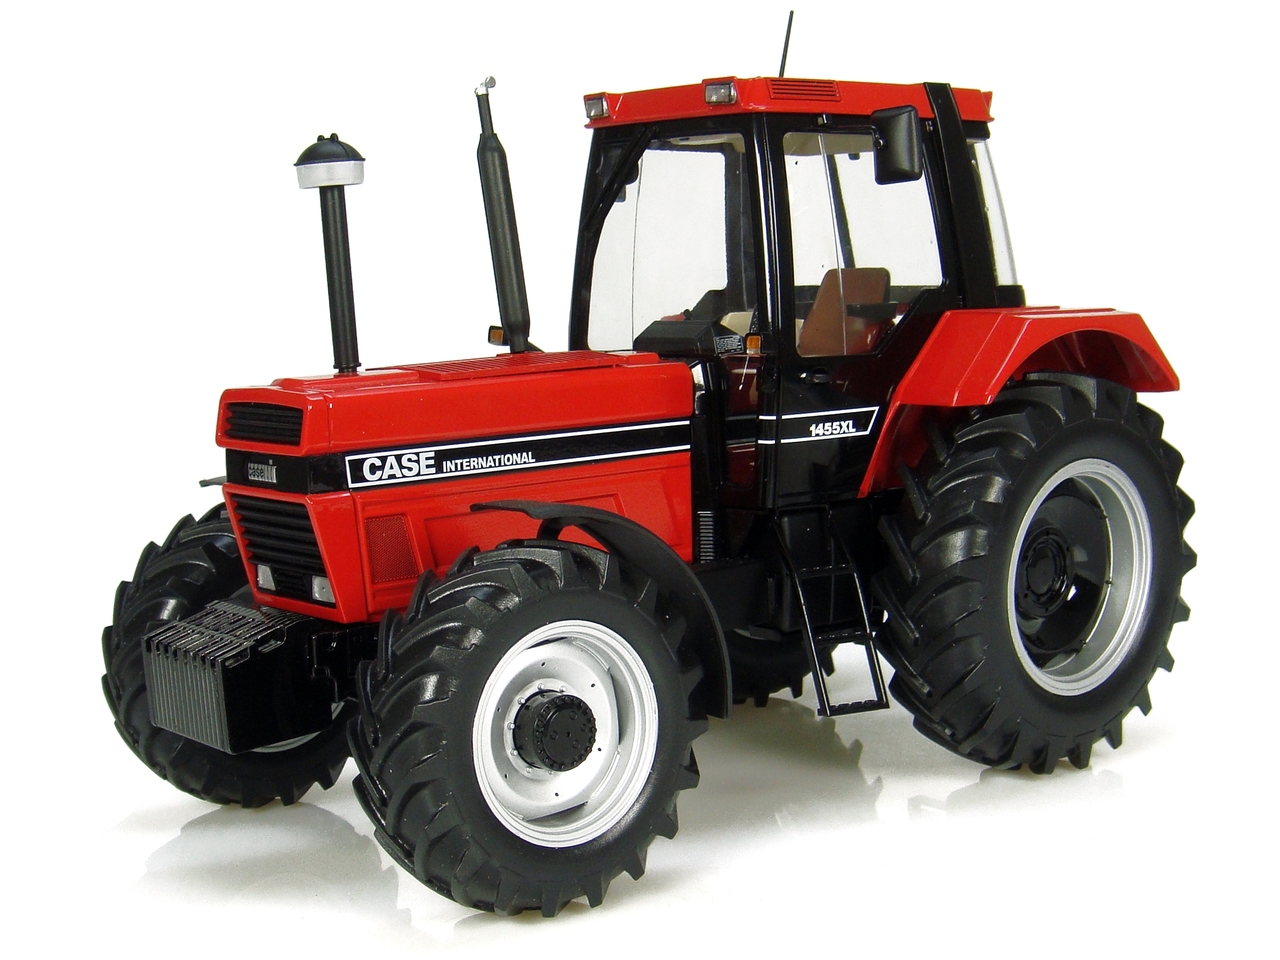 1987 Case IH 1455XL Tractor (3rd Generation) Limited Edition to 2000 pieces Worldwide 1/16 Diecast Model by Universal Hobbies